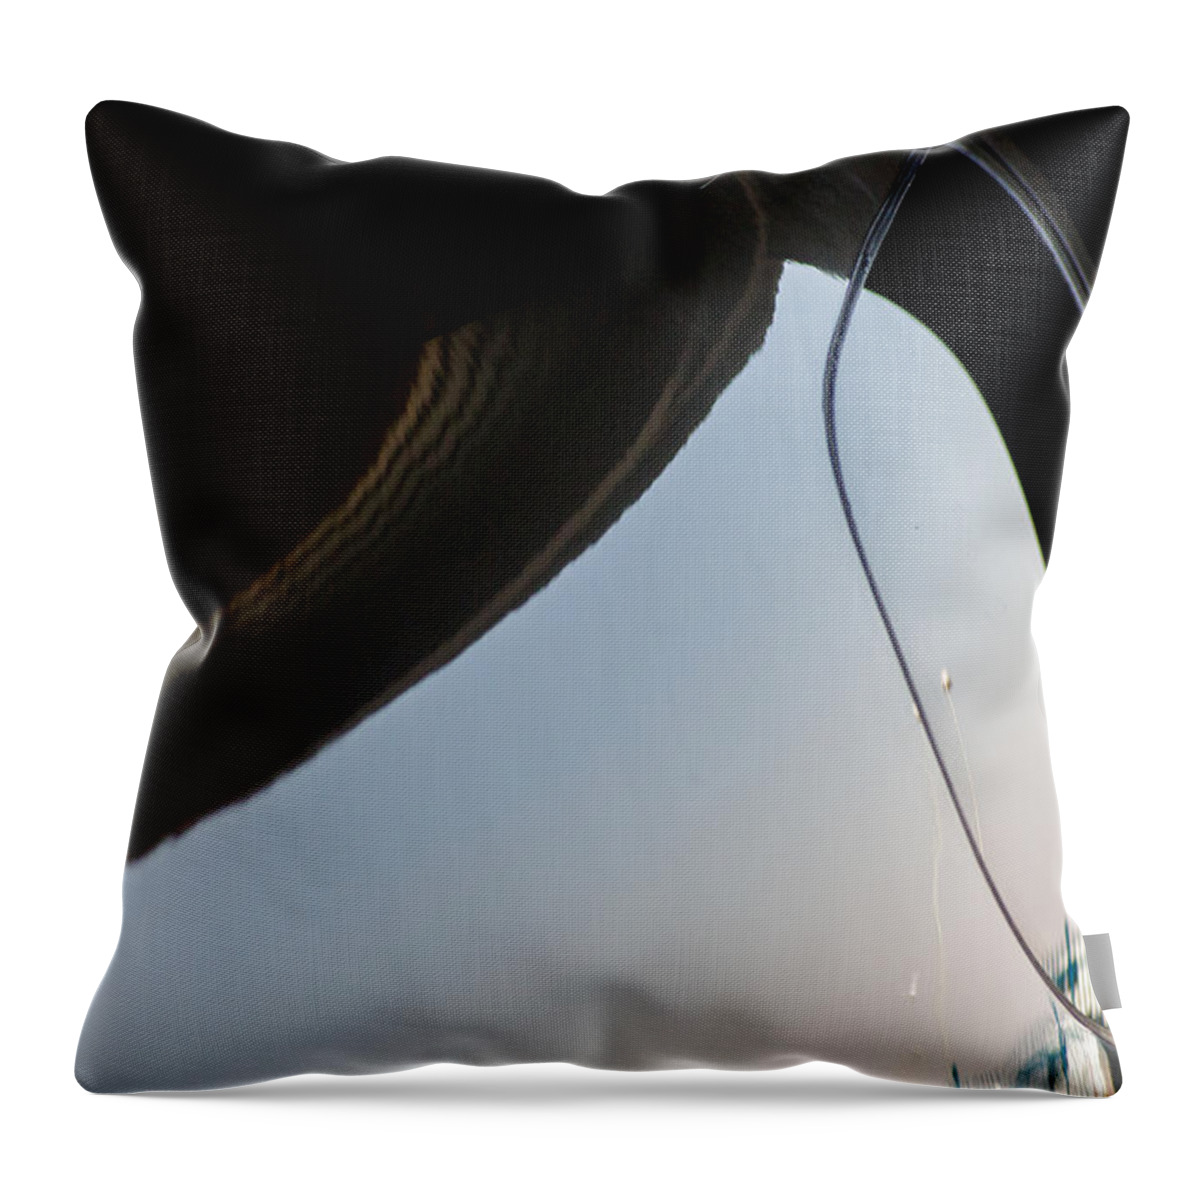 Reflection Throw Pillow featuring the photograph Cirrus Reflection by Paul Job